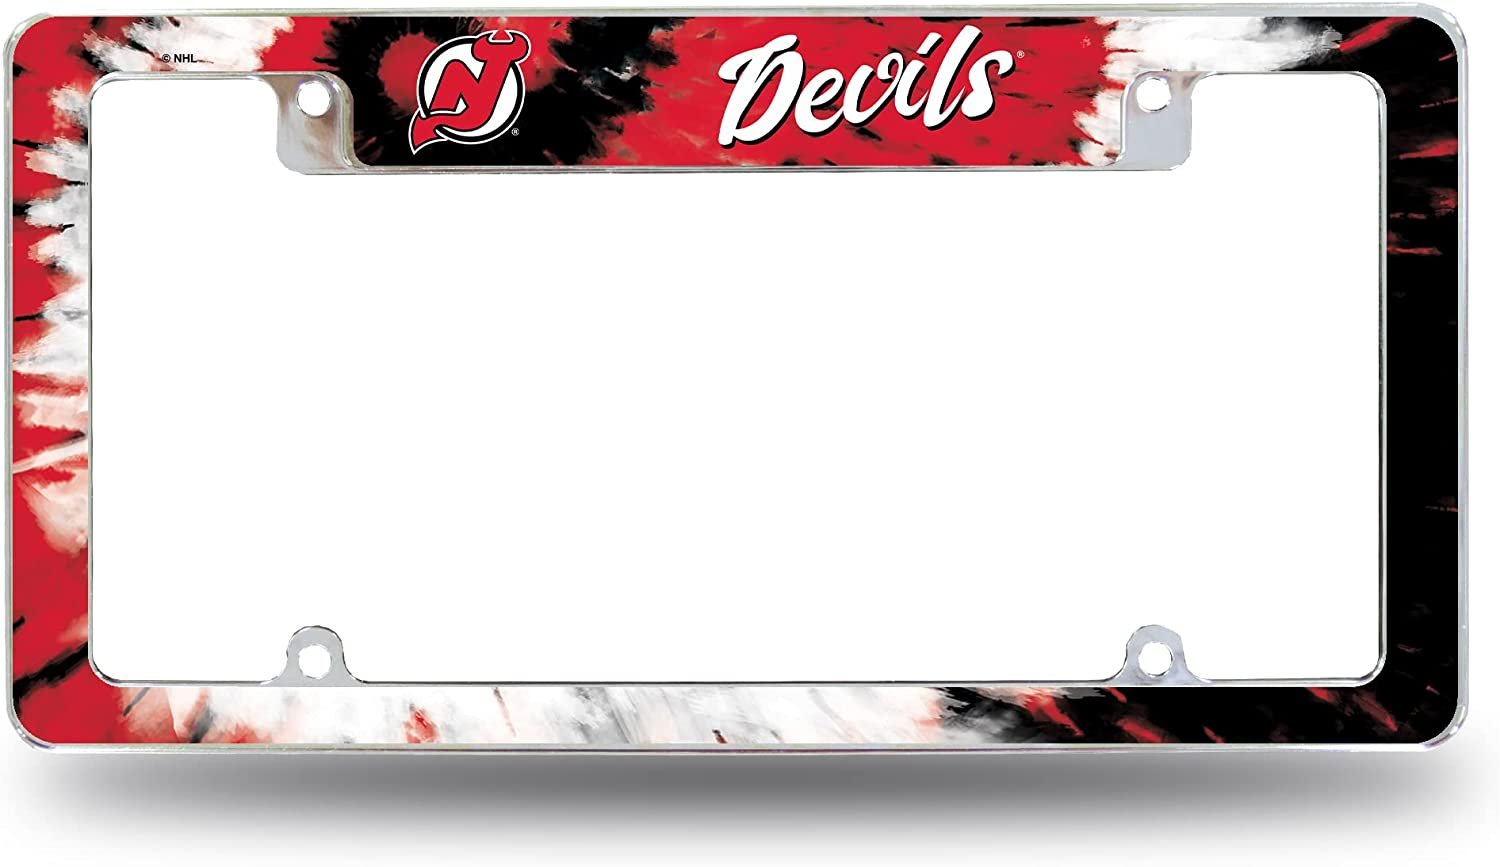 New Jersey Devils Metal License Plate Frame Chrome Tag Cover Tie Dye Design 6x12 Inch